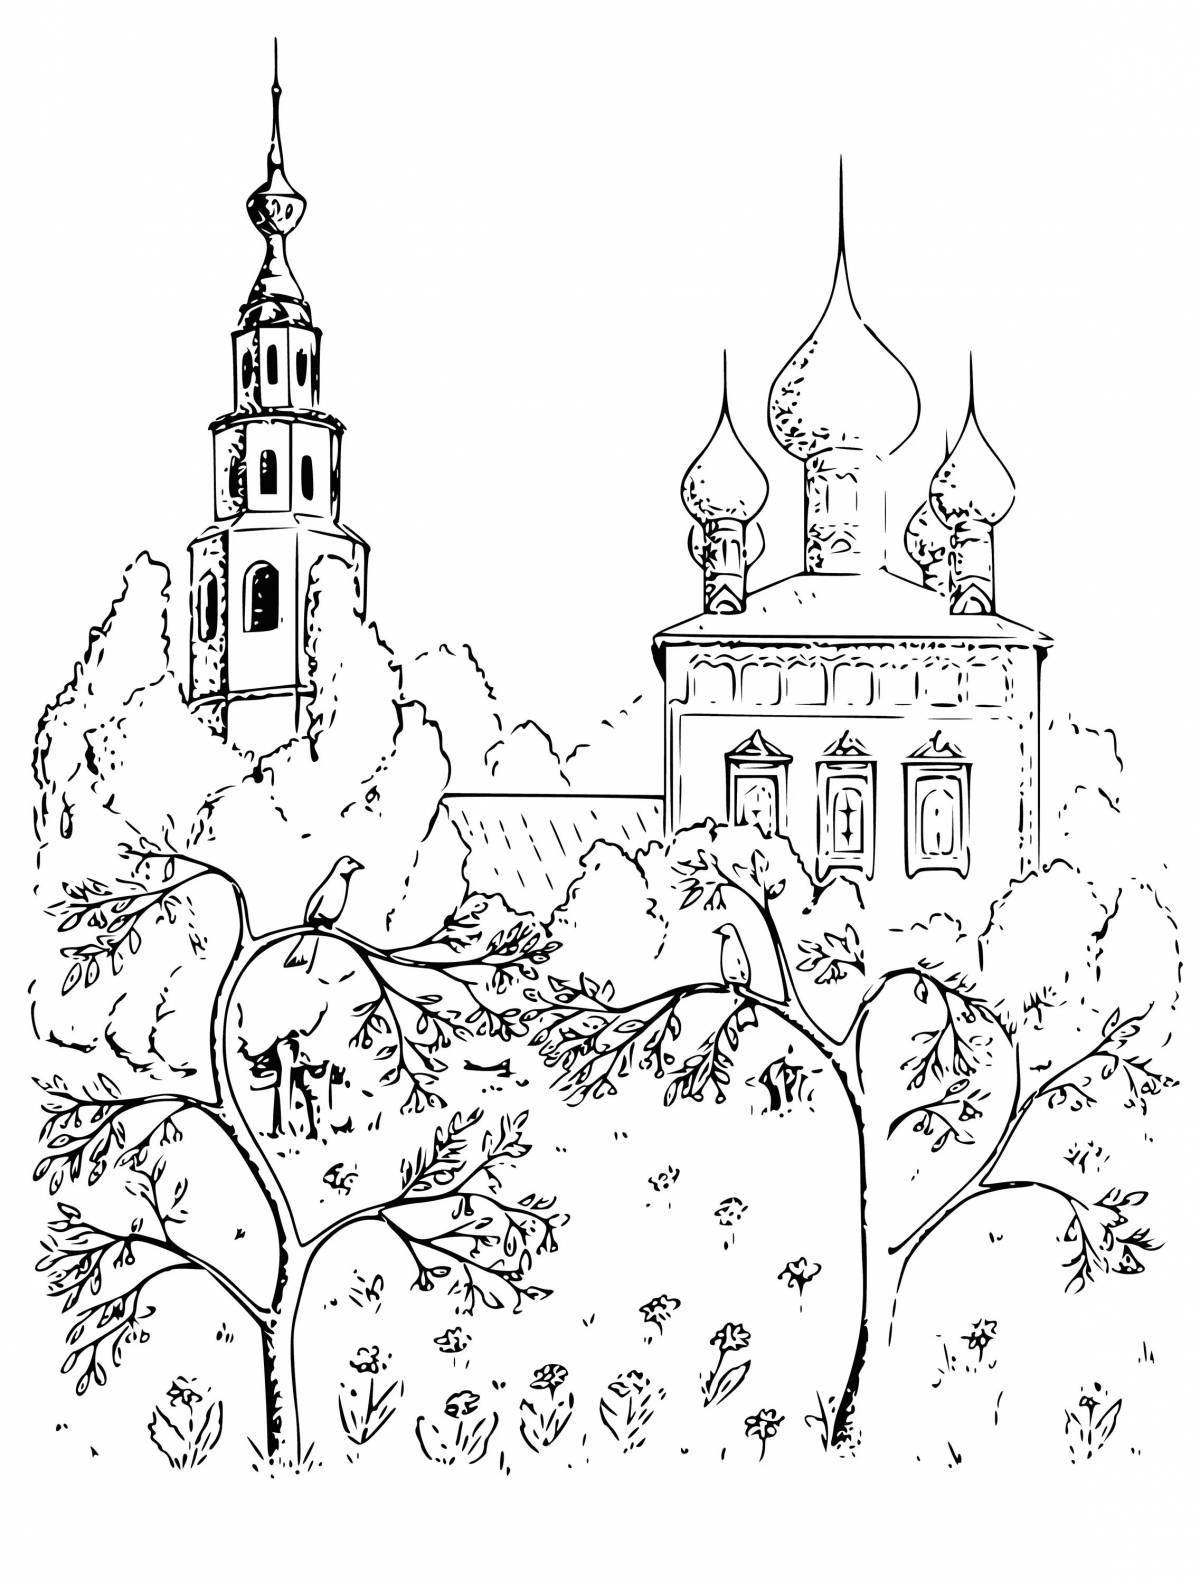 Coloring page russia my homeland for kids